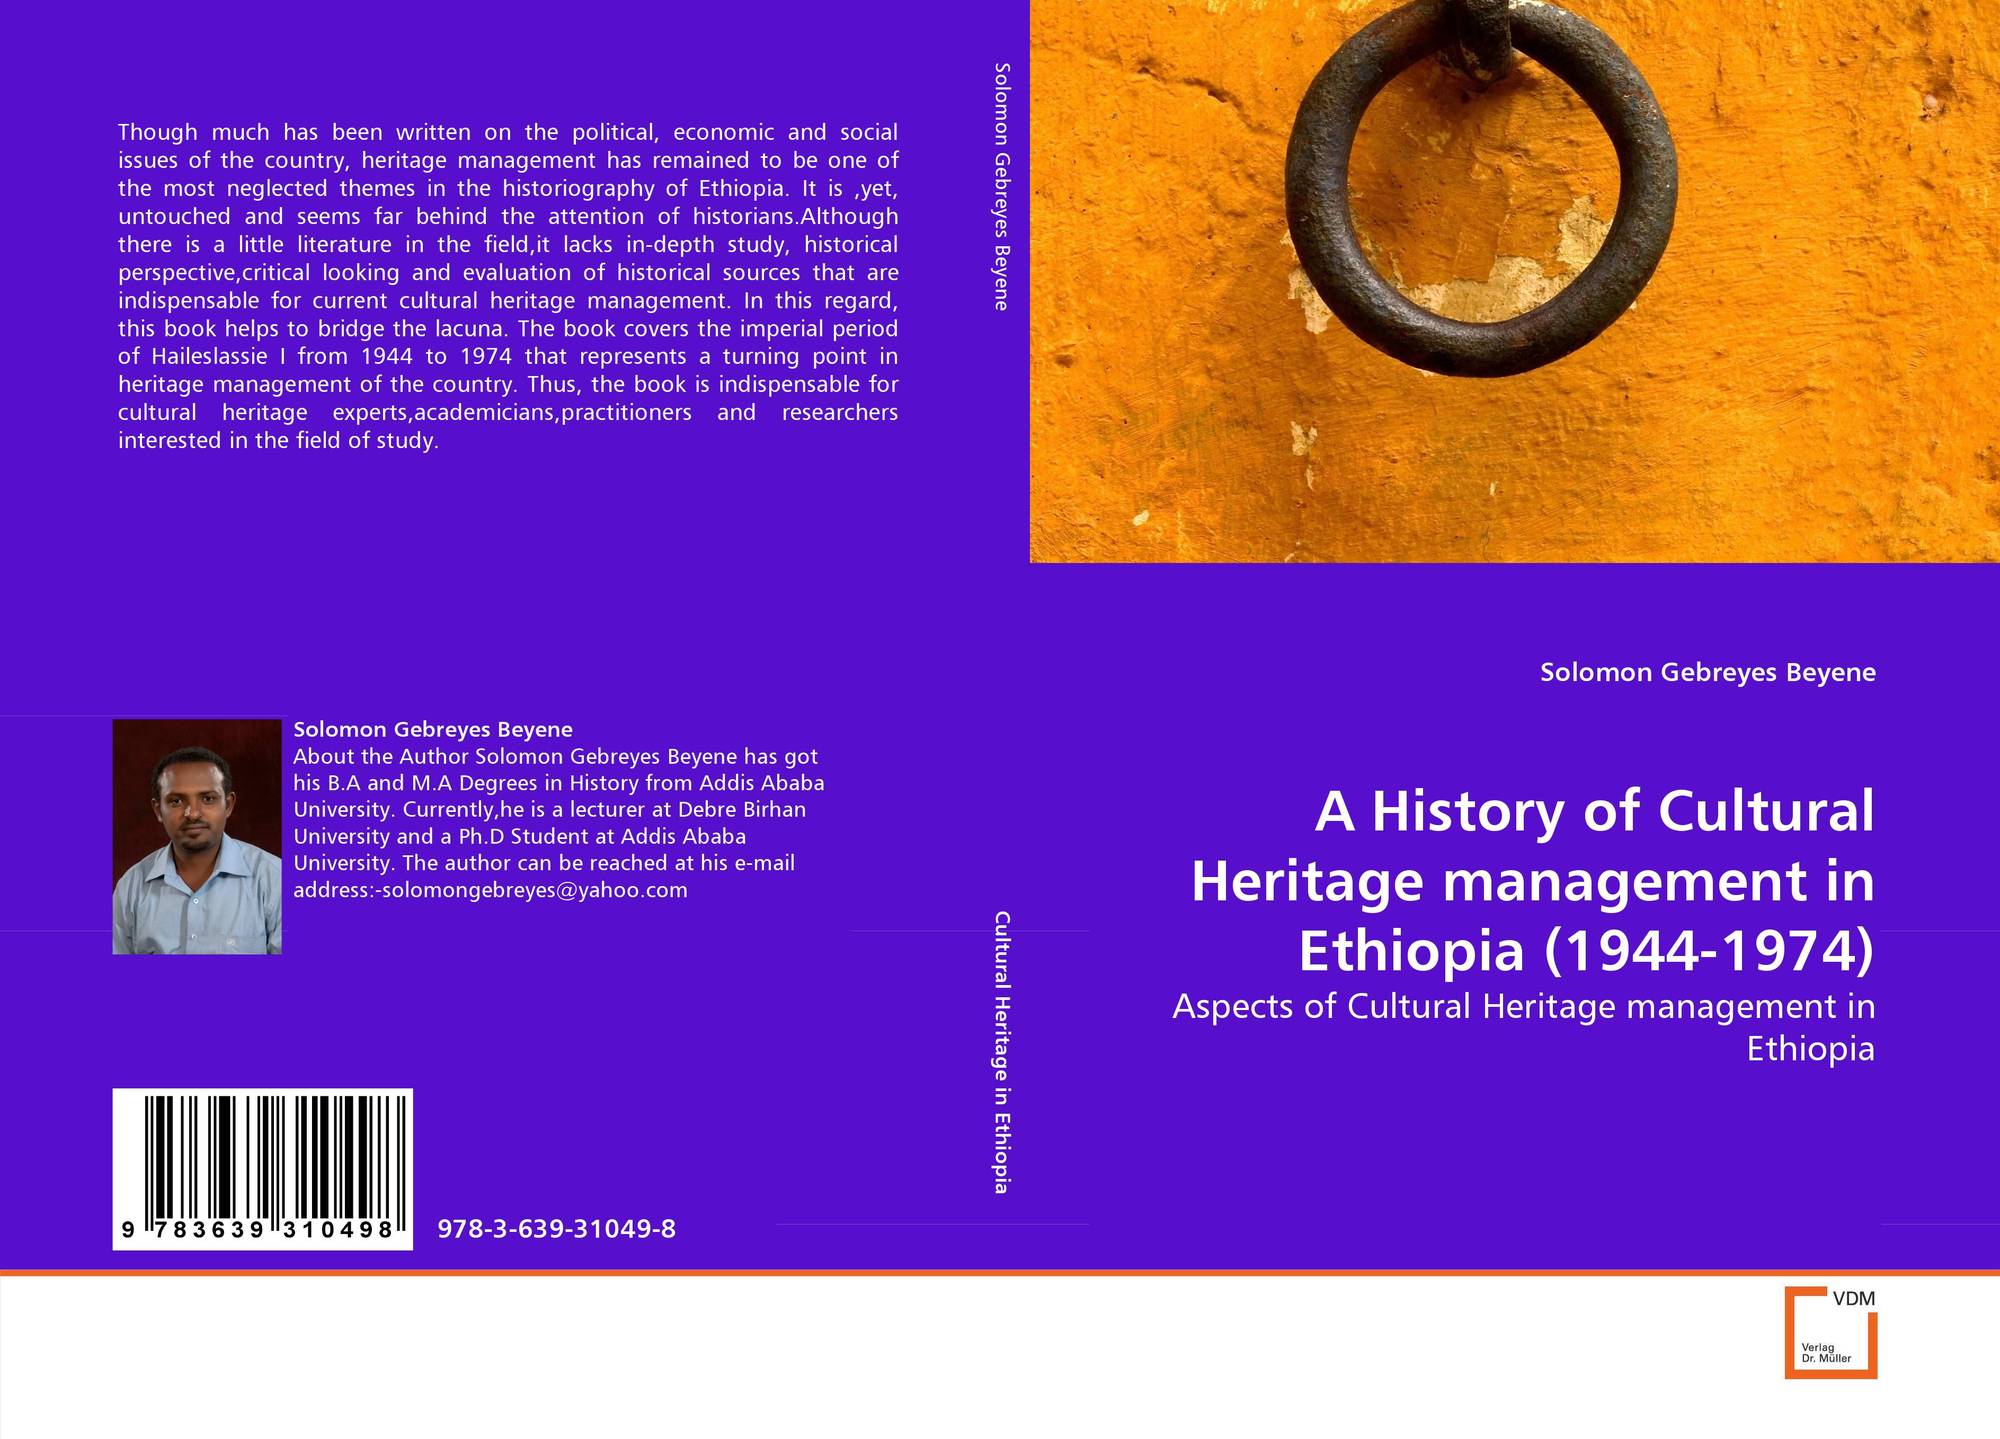 A History of Cultural Heritage management in Ethiopia (1944-1974), 978